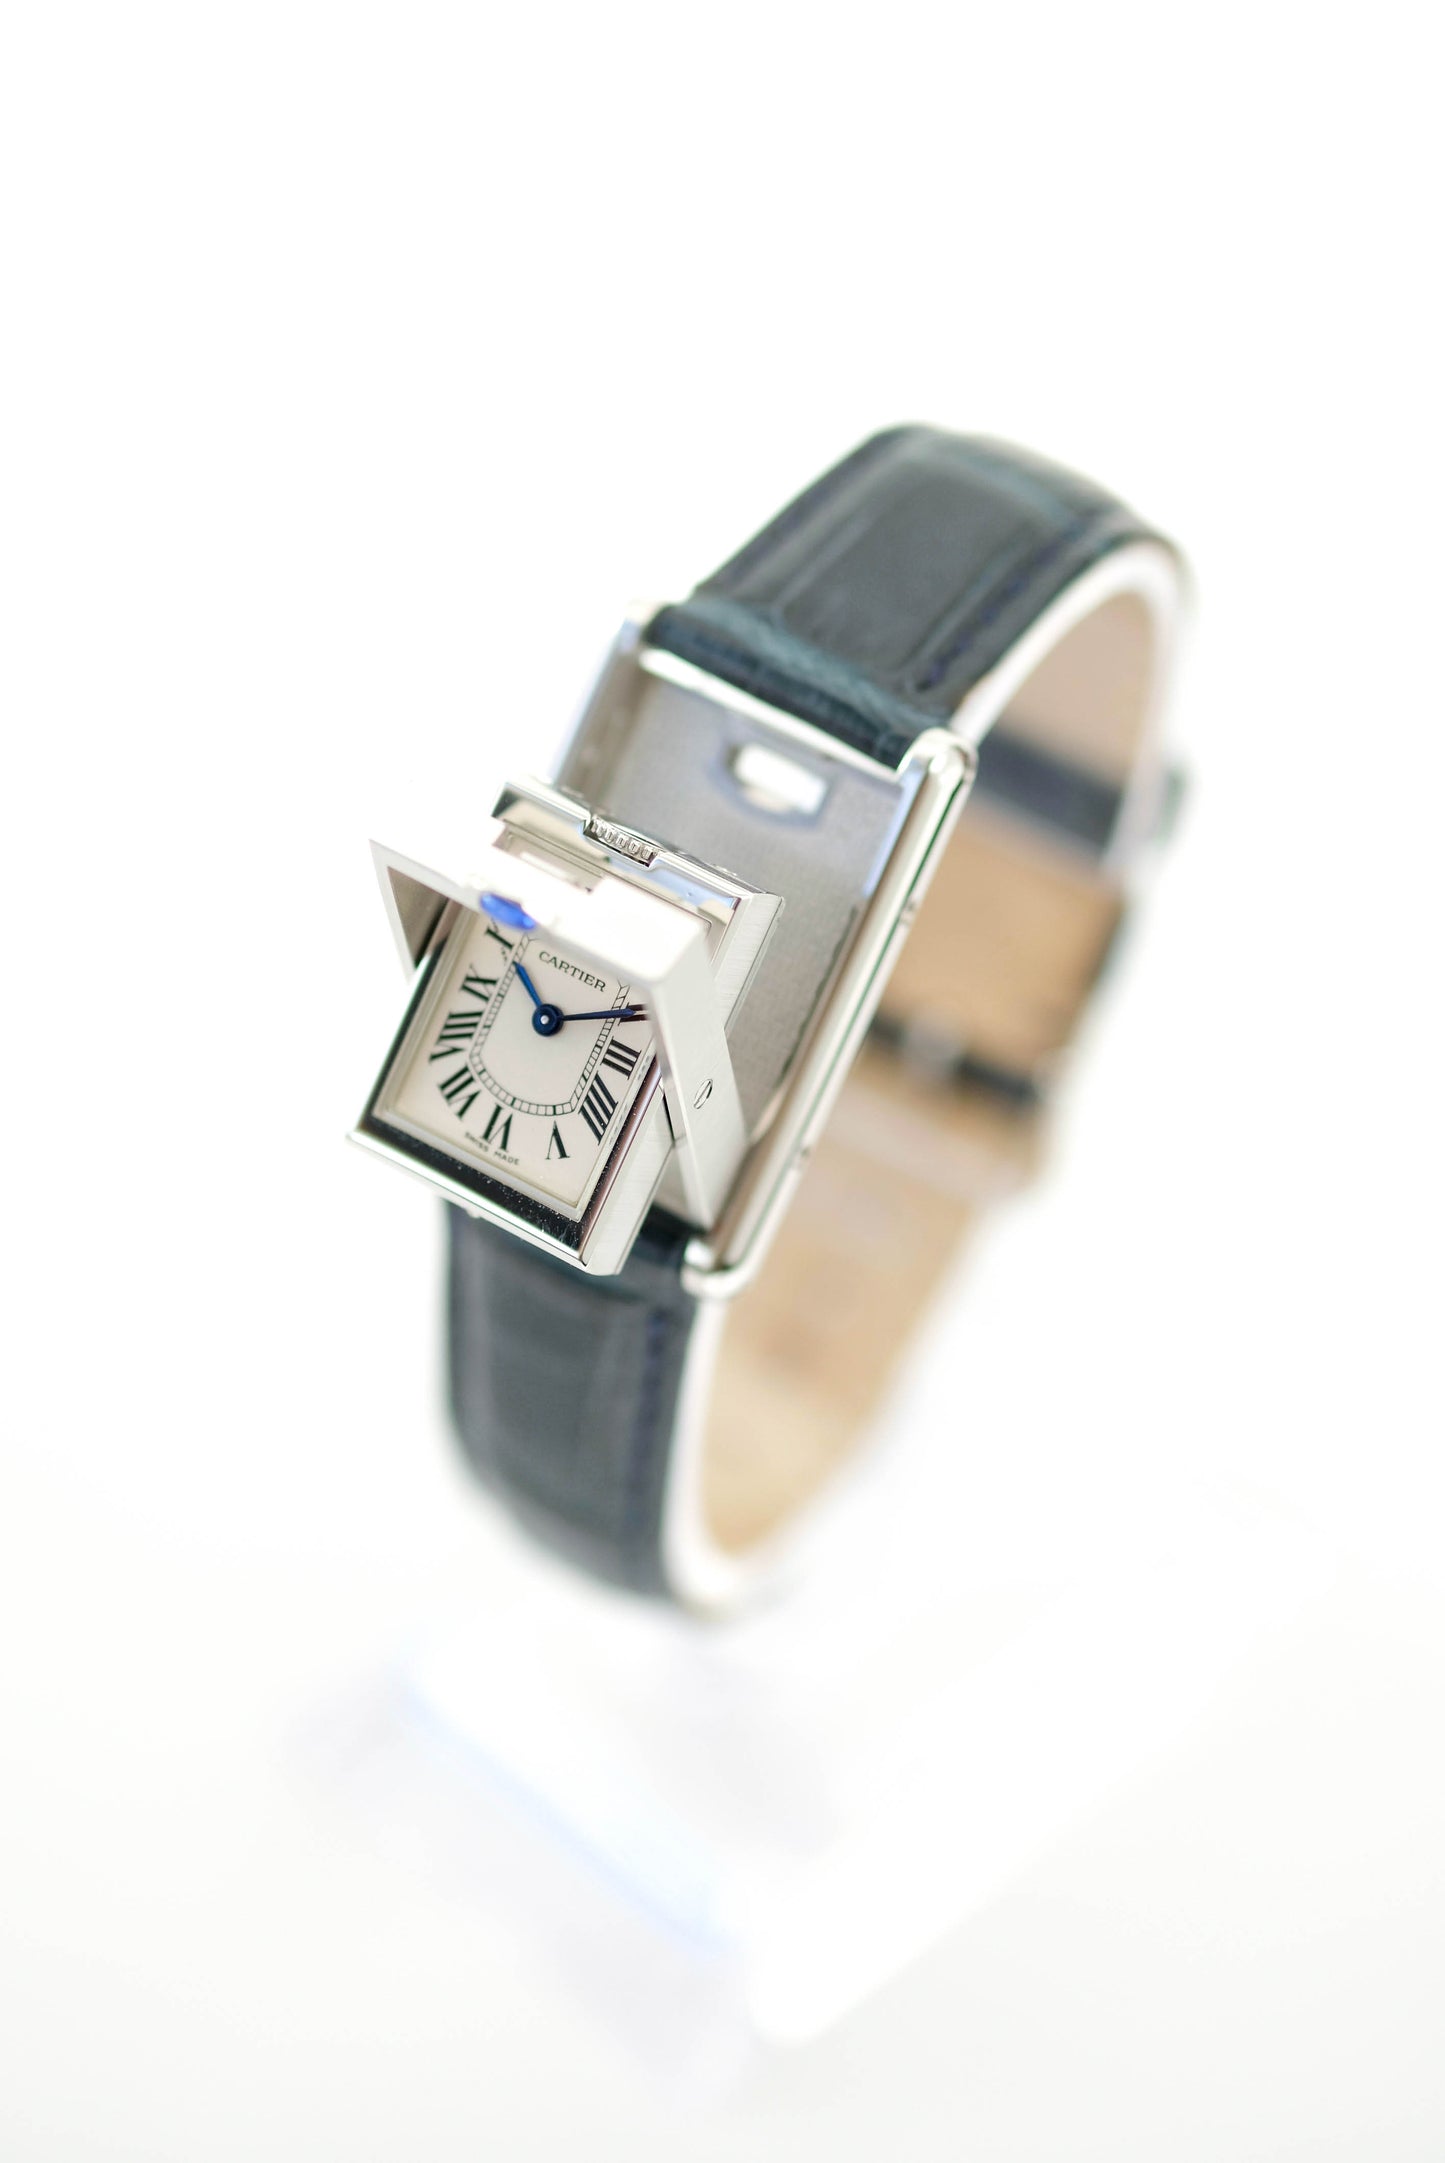 Cartier Tank Basculante - 2003 with original papers